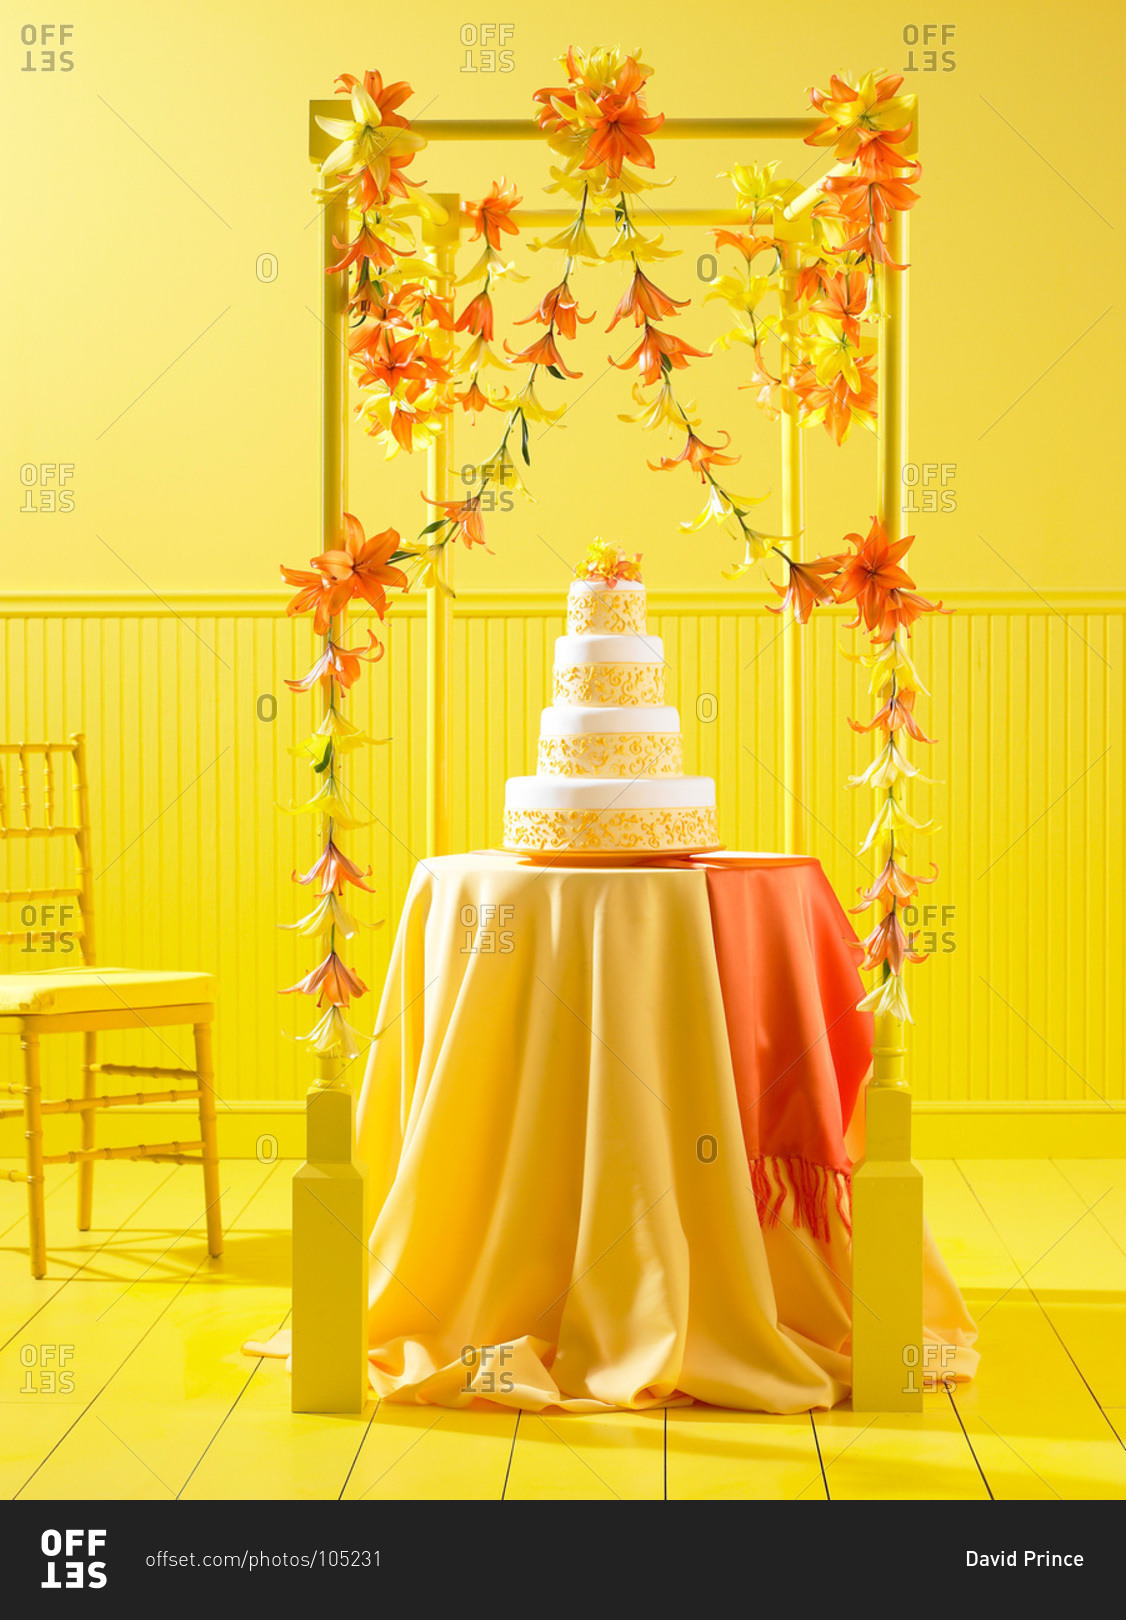 Decorations with a wedding cake